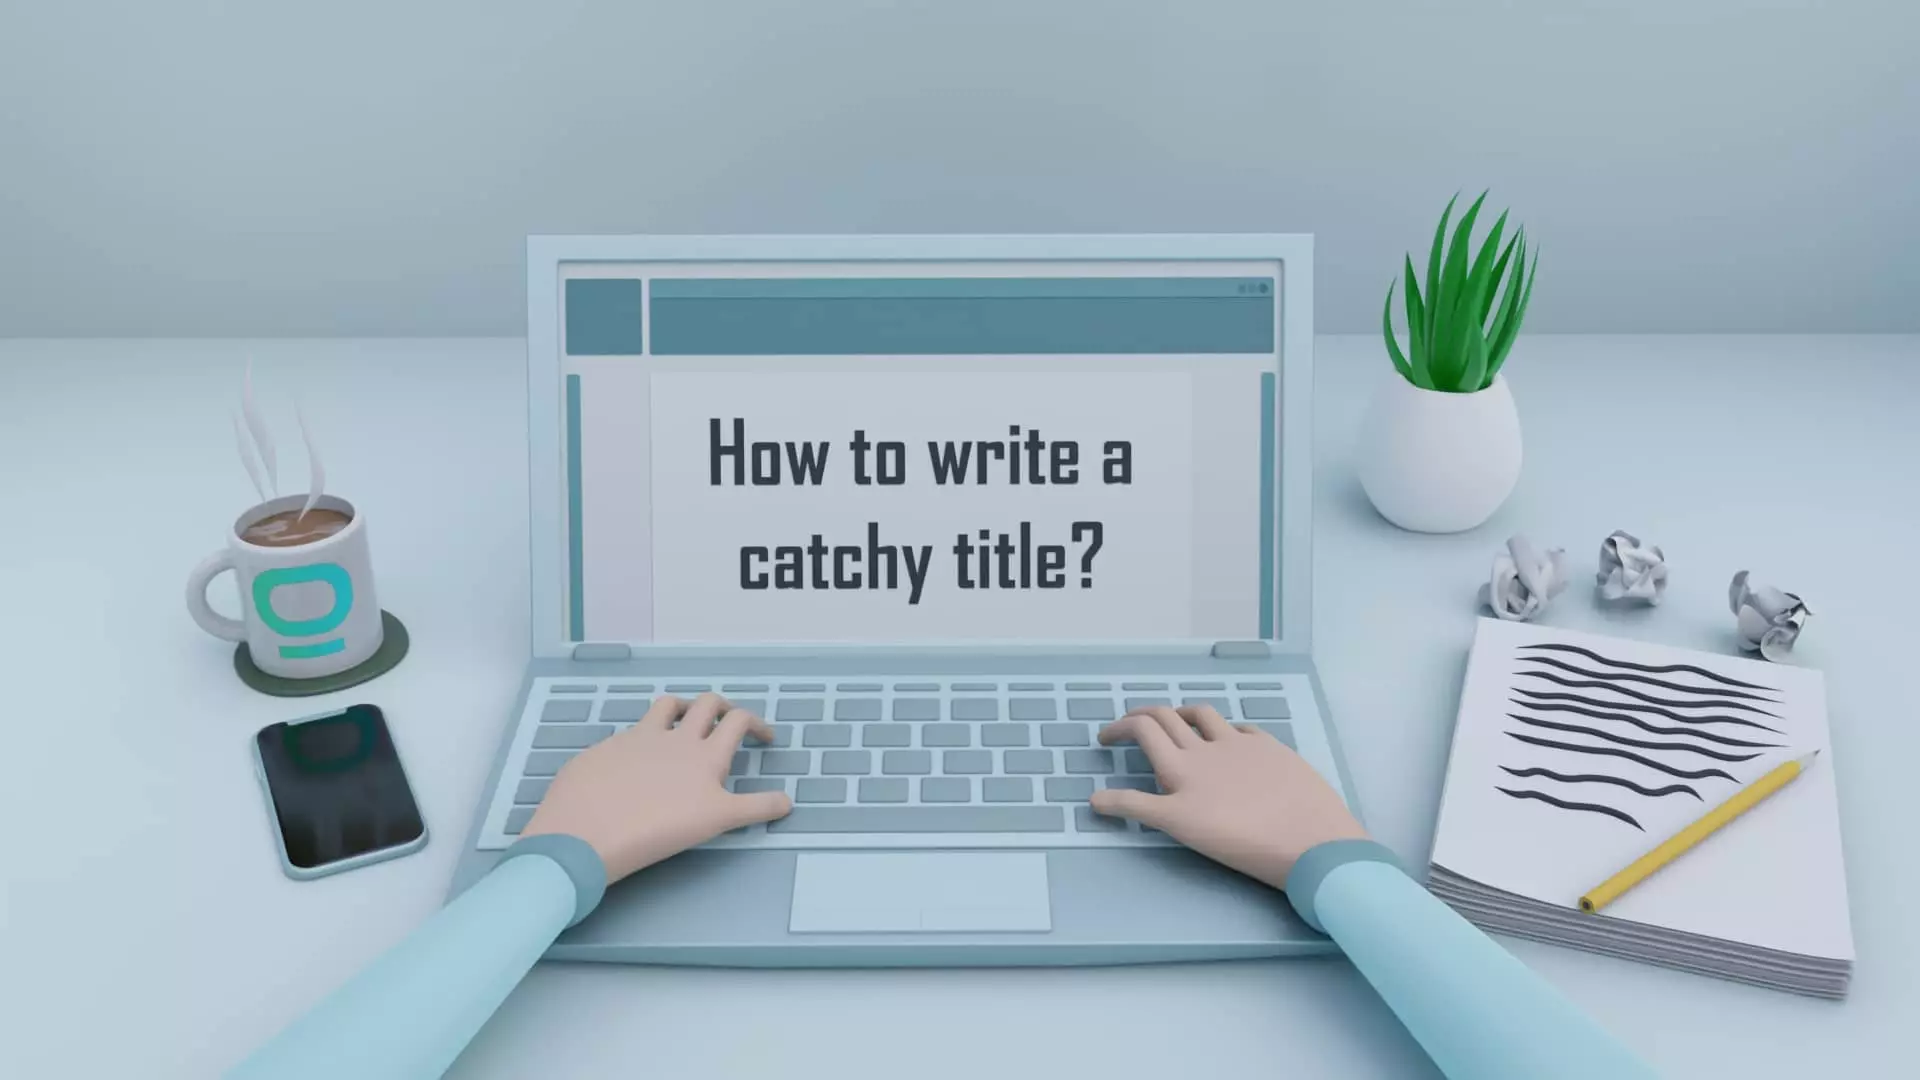 17+ reliable ways to write a catchy title [+ TITLE TEMPLATES]